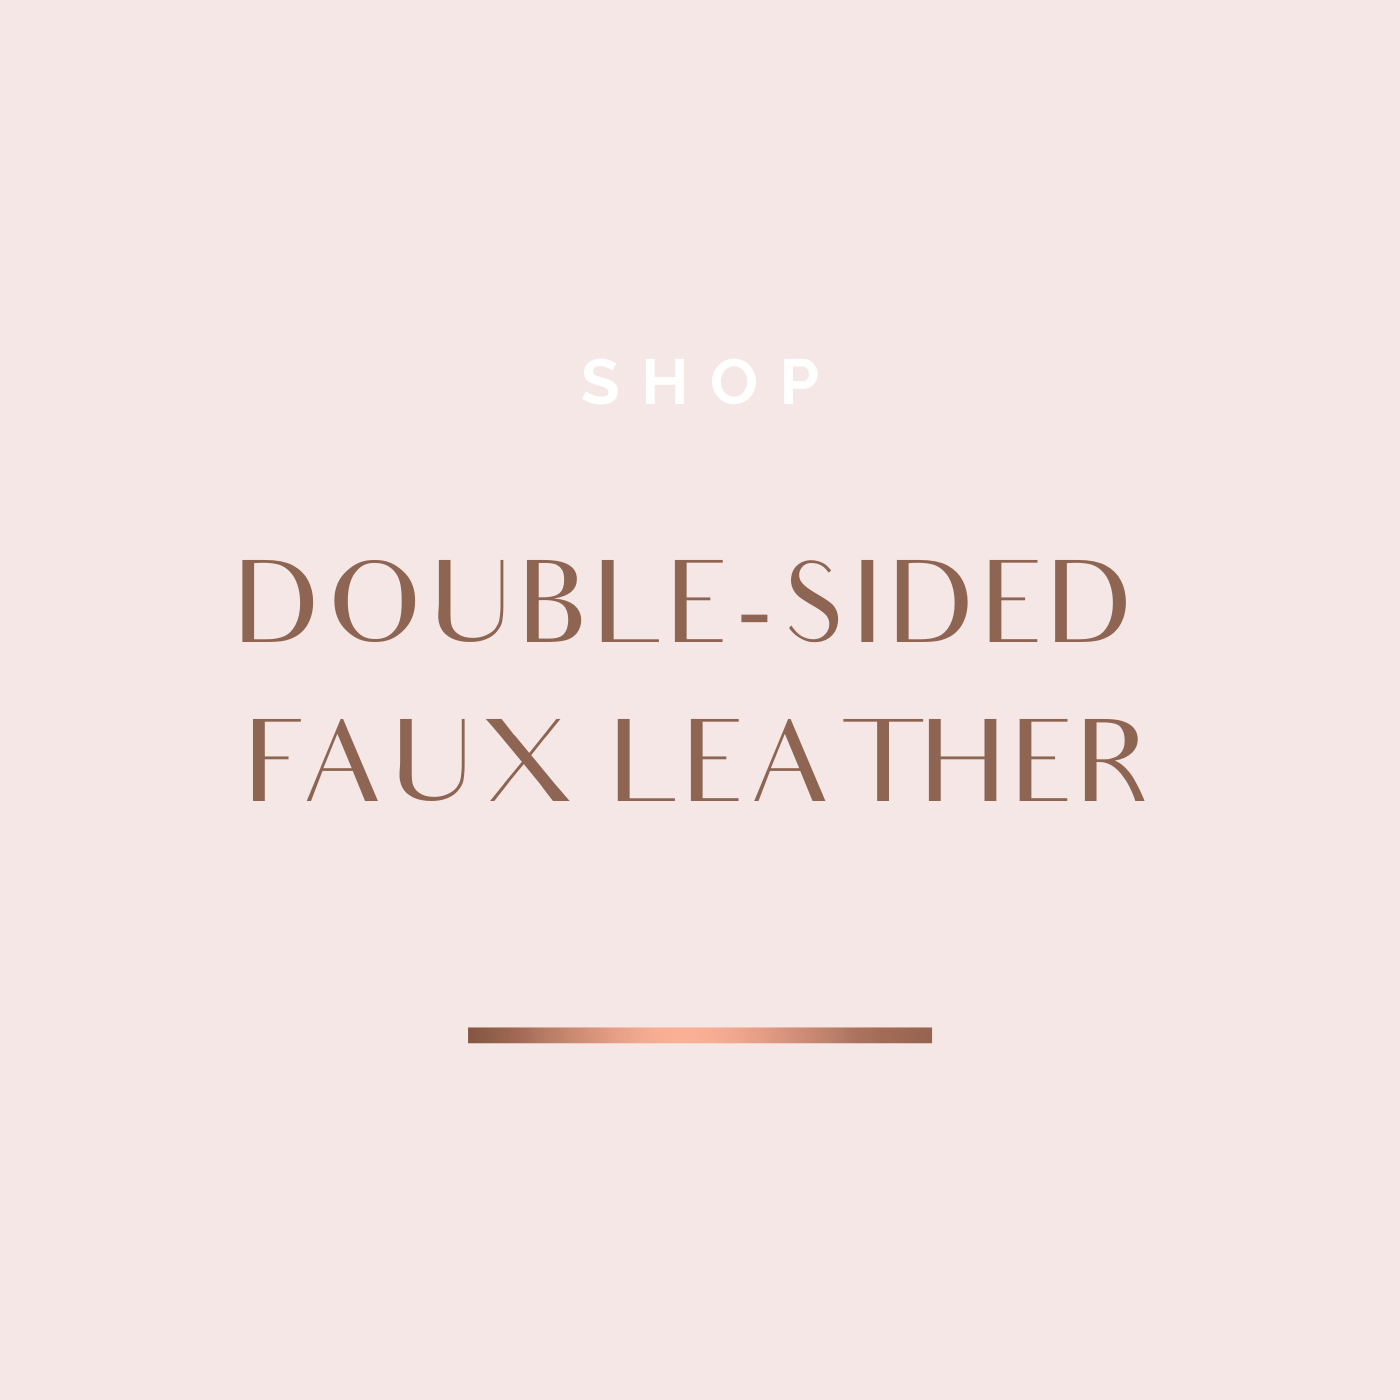 Double-sided Texas Faux Leather